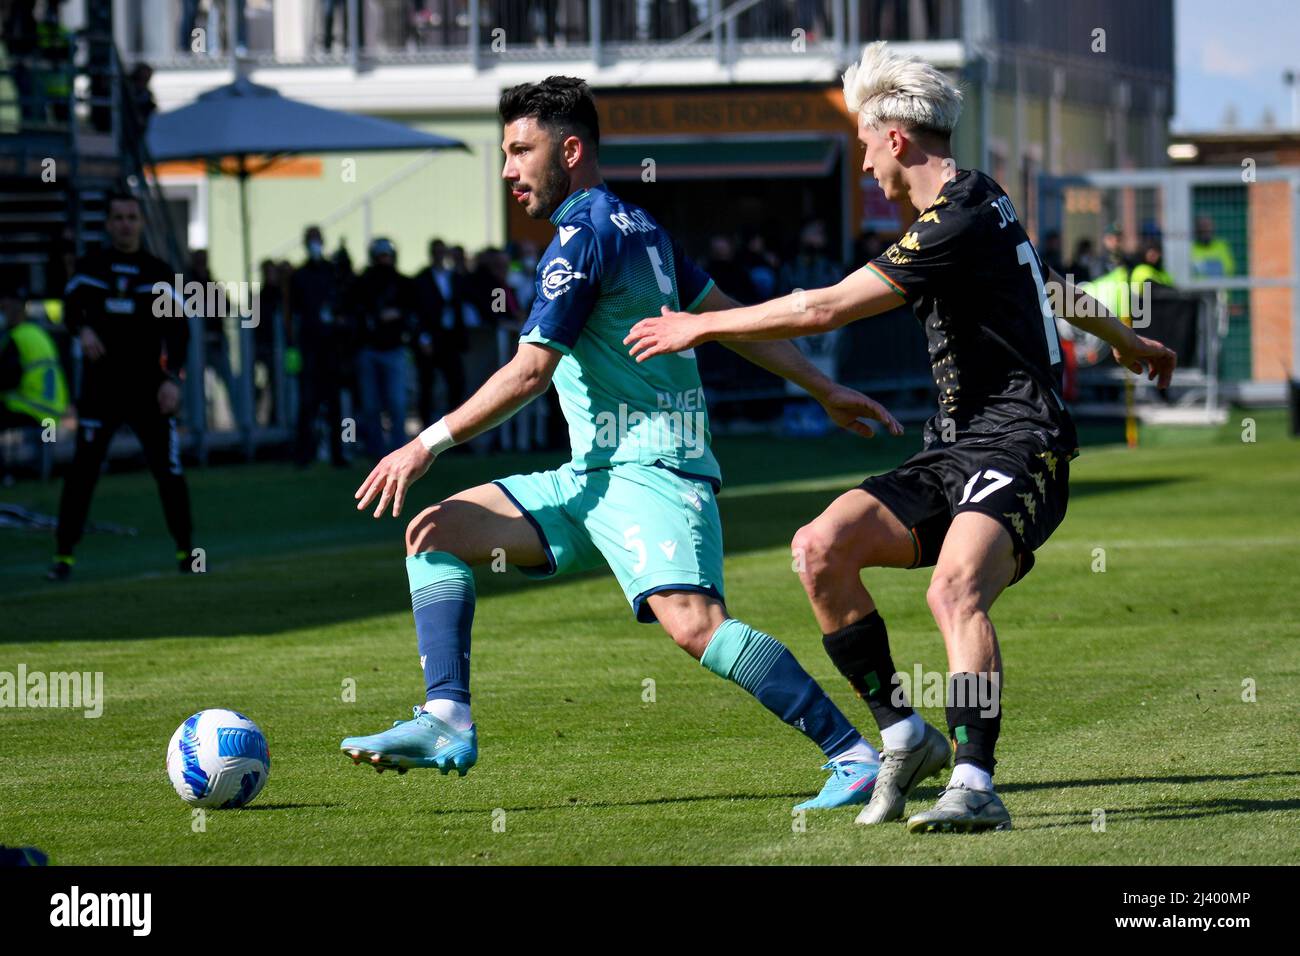 Venice, Italy. 10th Apr, 2022. Udinese's Tolgay Arslan hindered by Venezia's  Dennis Johnsen during Venezia FC vs Udinese Calcio, italian soccer Serie A  match in Venice, Italy, aprile 10 2022 Credit: Independent